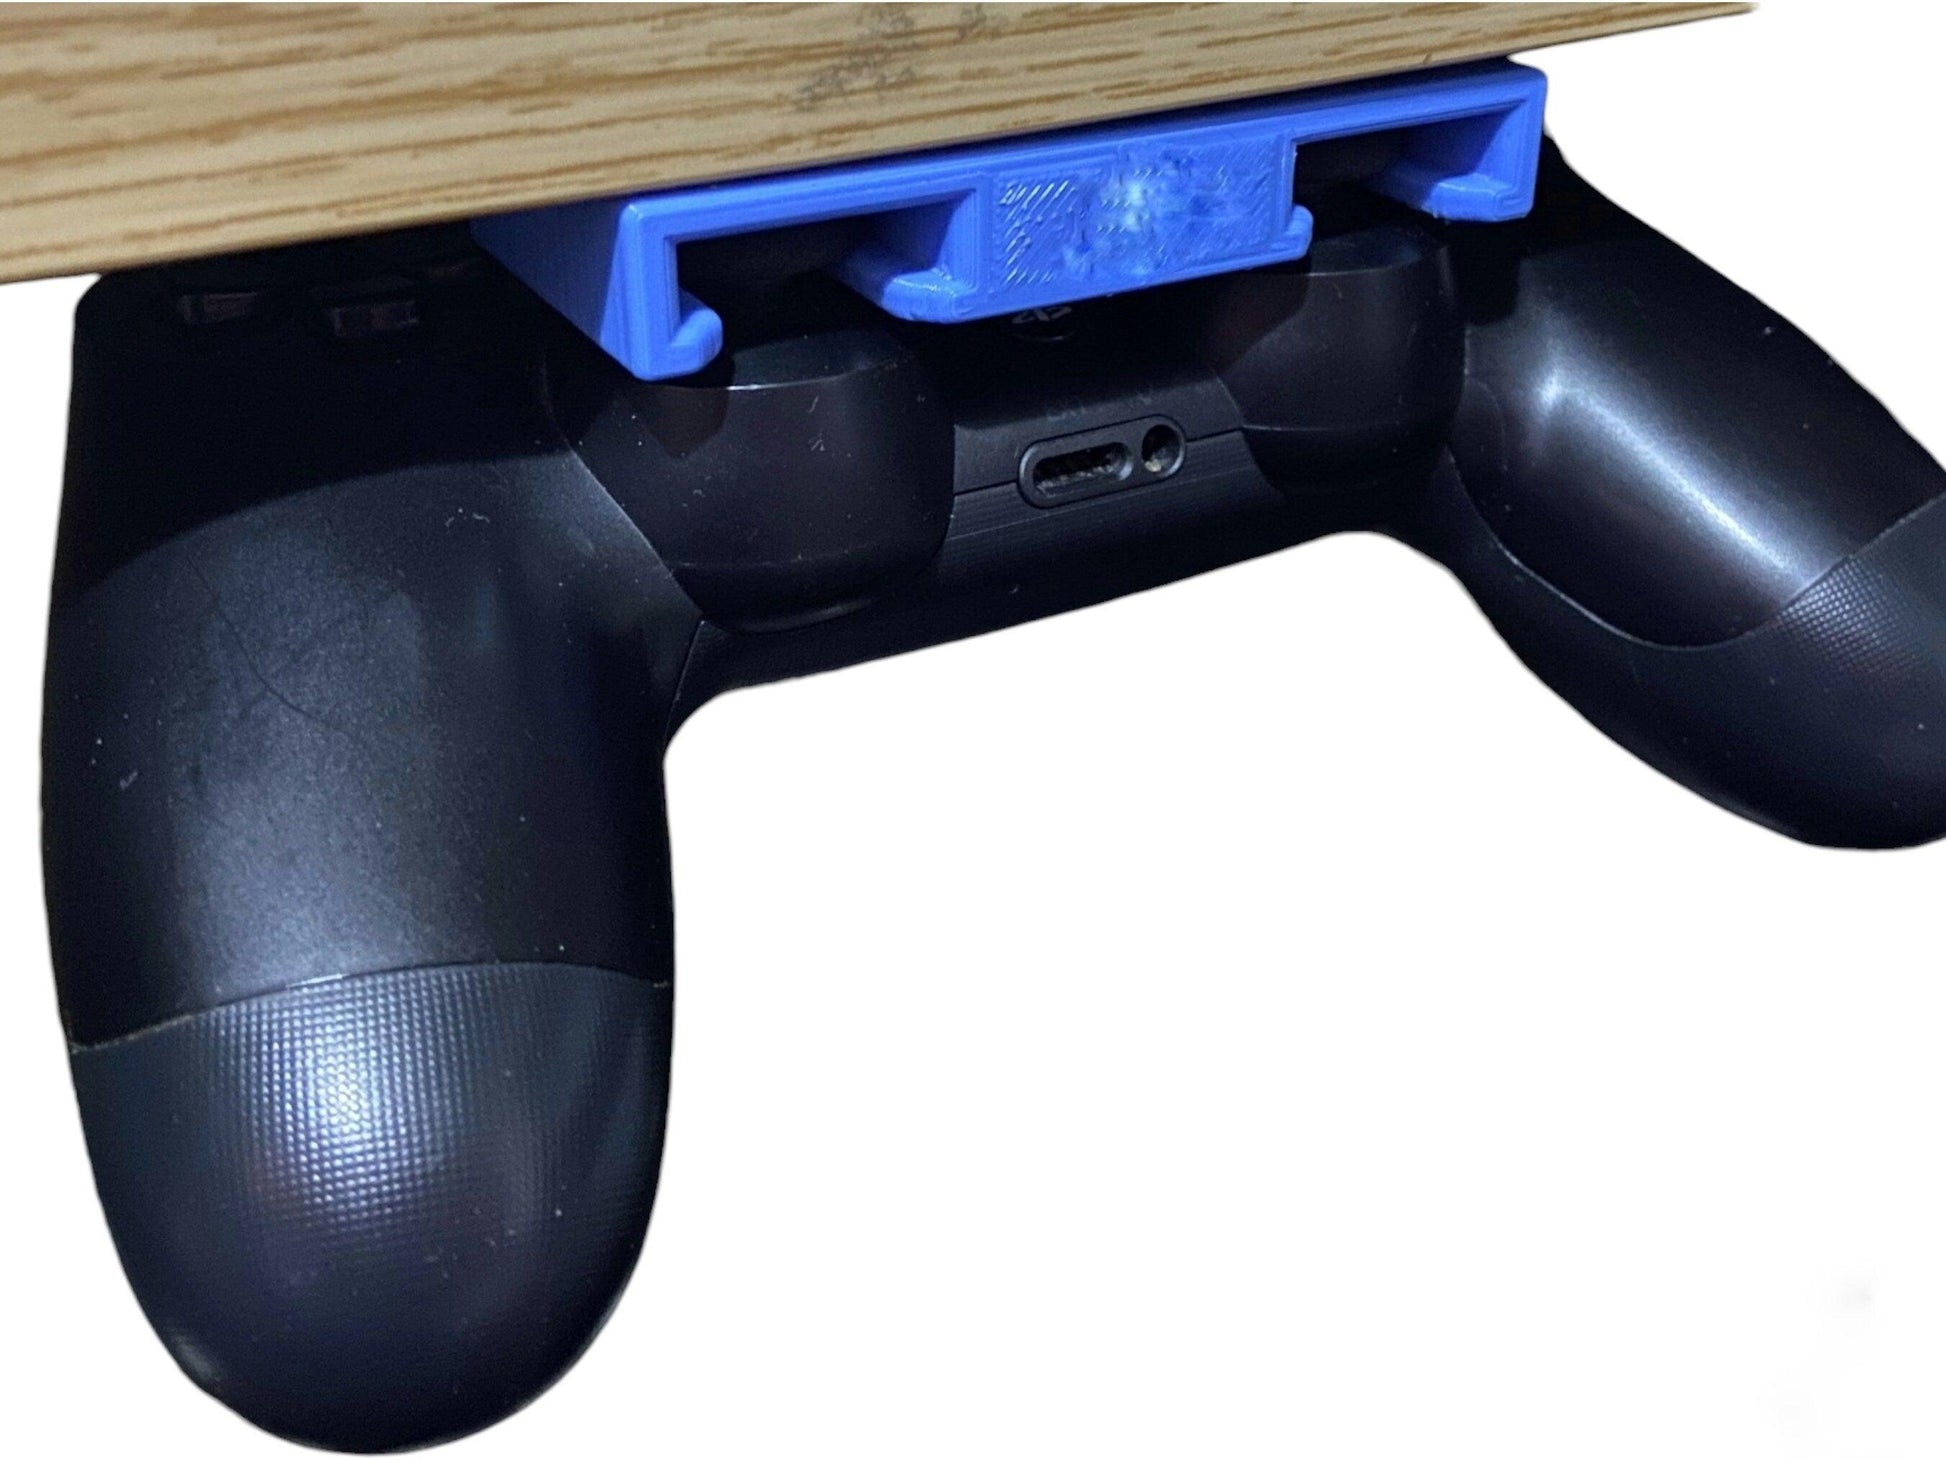 Under Desk Mount Compatible With PS5 Controllers - Works with PS4 and Playstation 5 Controllers